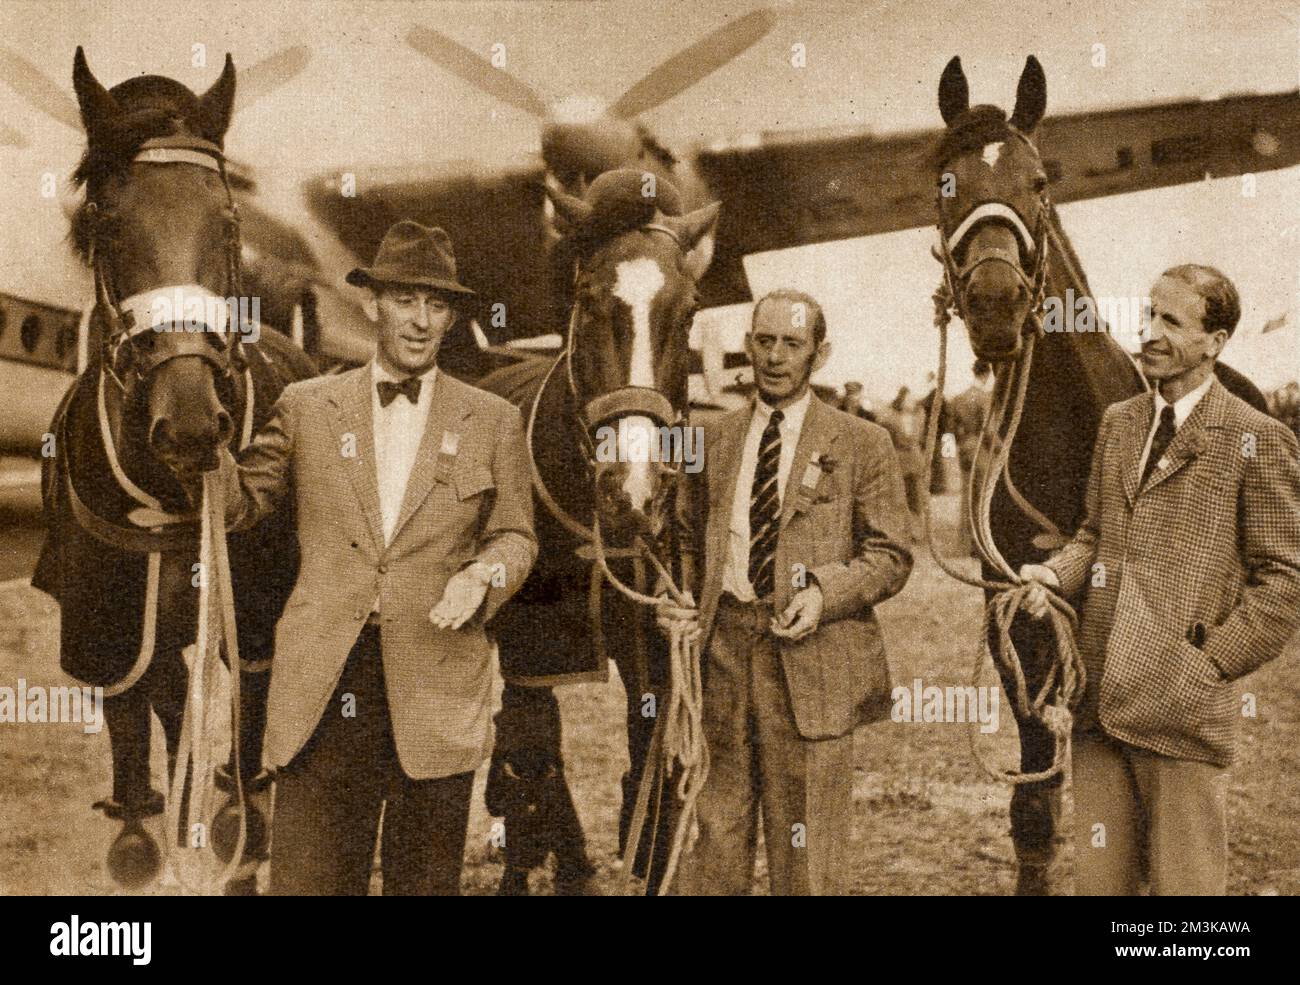 Britain's only victory in the XVth Olympic Games in Helsinki: the winners of the team showjumping gold medal (from l to r) Colonel H.M. Llewellyn, with Foxhunter; Mr W. White, with Nizefella; and Lt-Colonel D.N. Stewart, with Aherlow on their return to Britain.  1952 Stock Photo